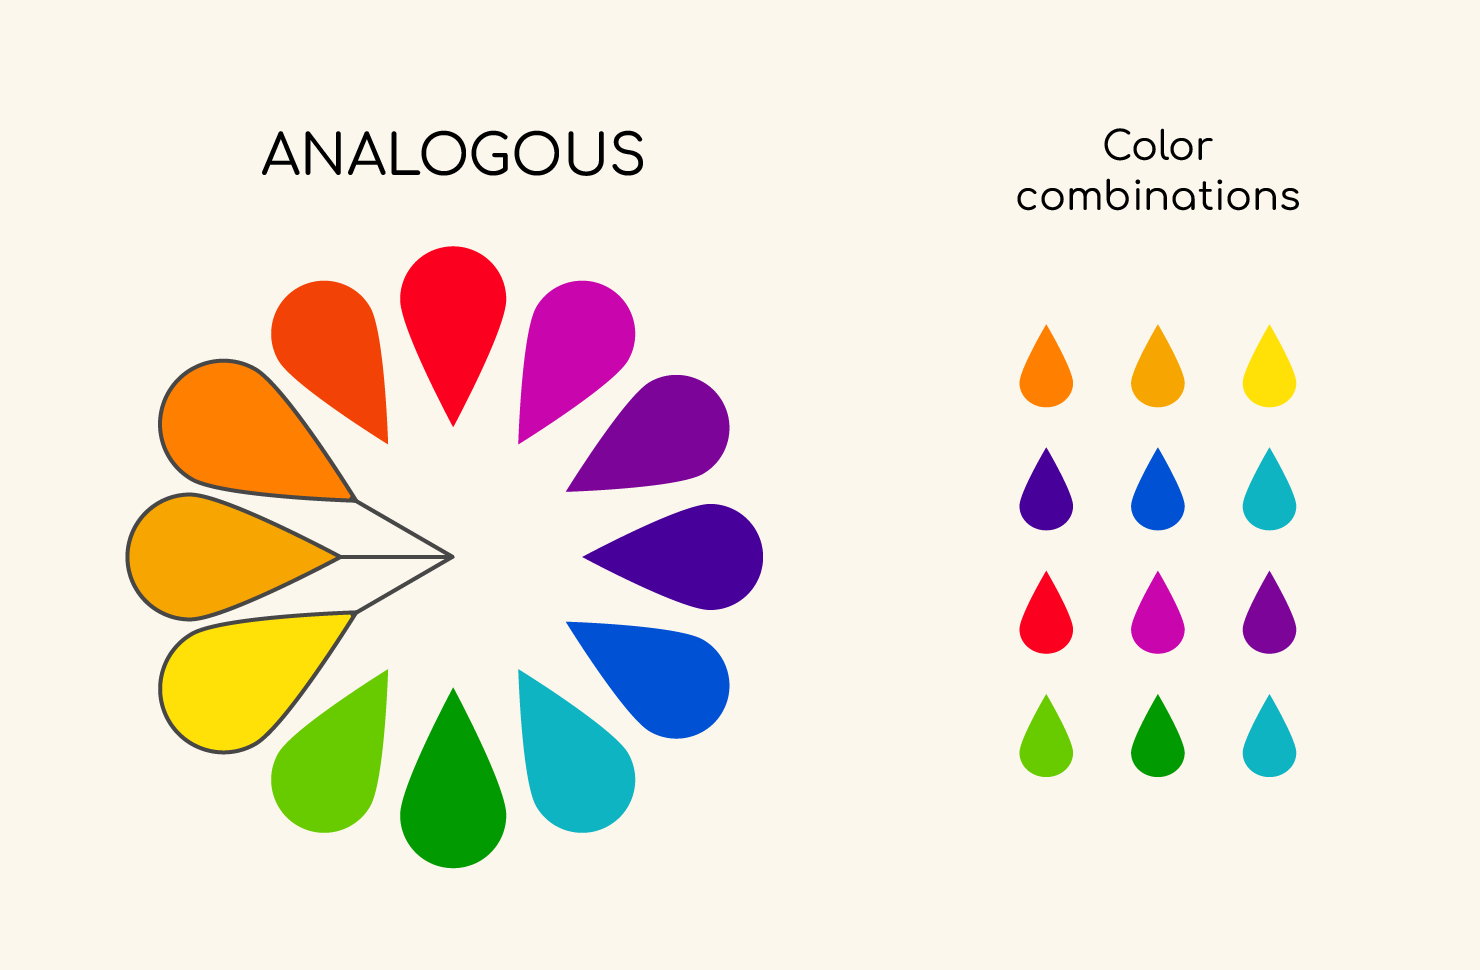 Rules of color combination